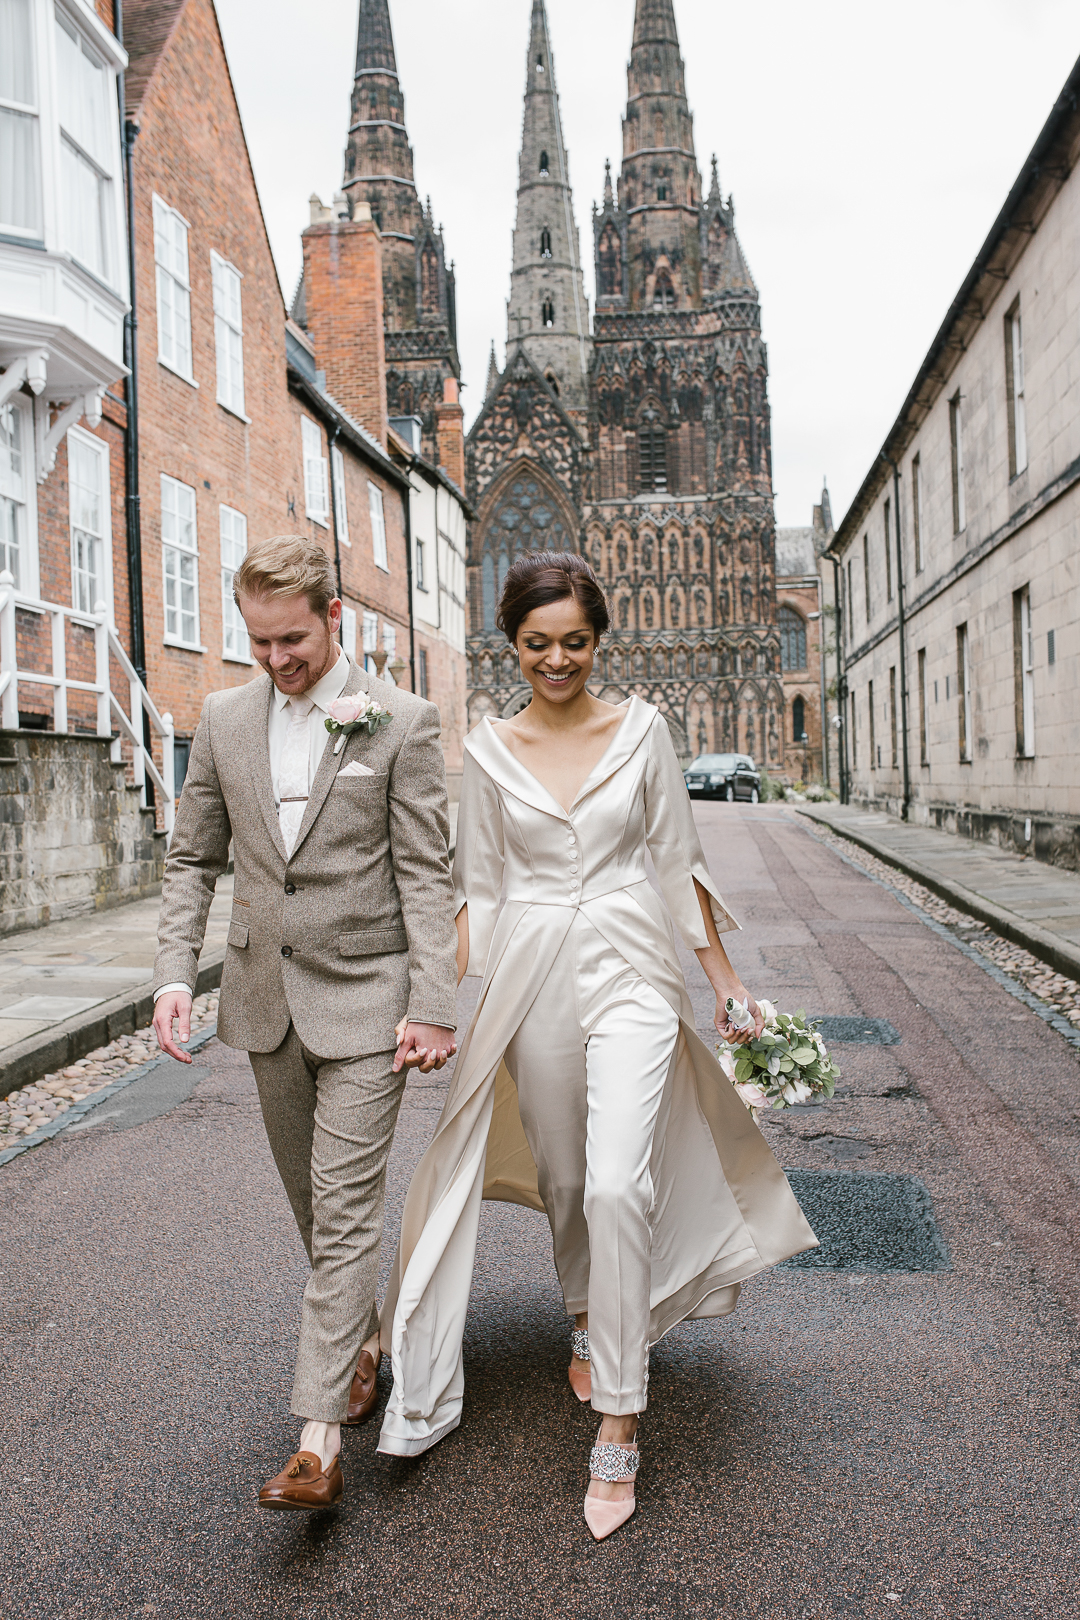 happy fun photo of bride and groom laughing infront of lichfield cathedral- natural wedding photographer in staffordshire